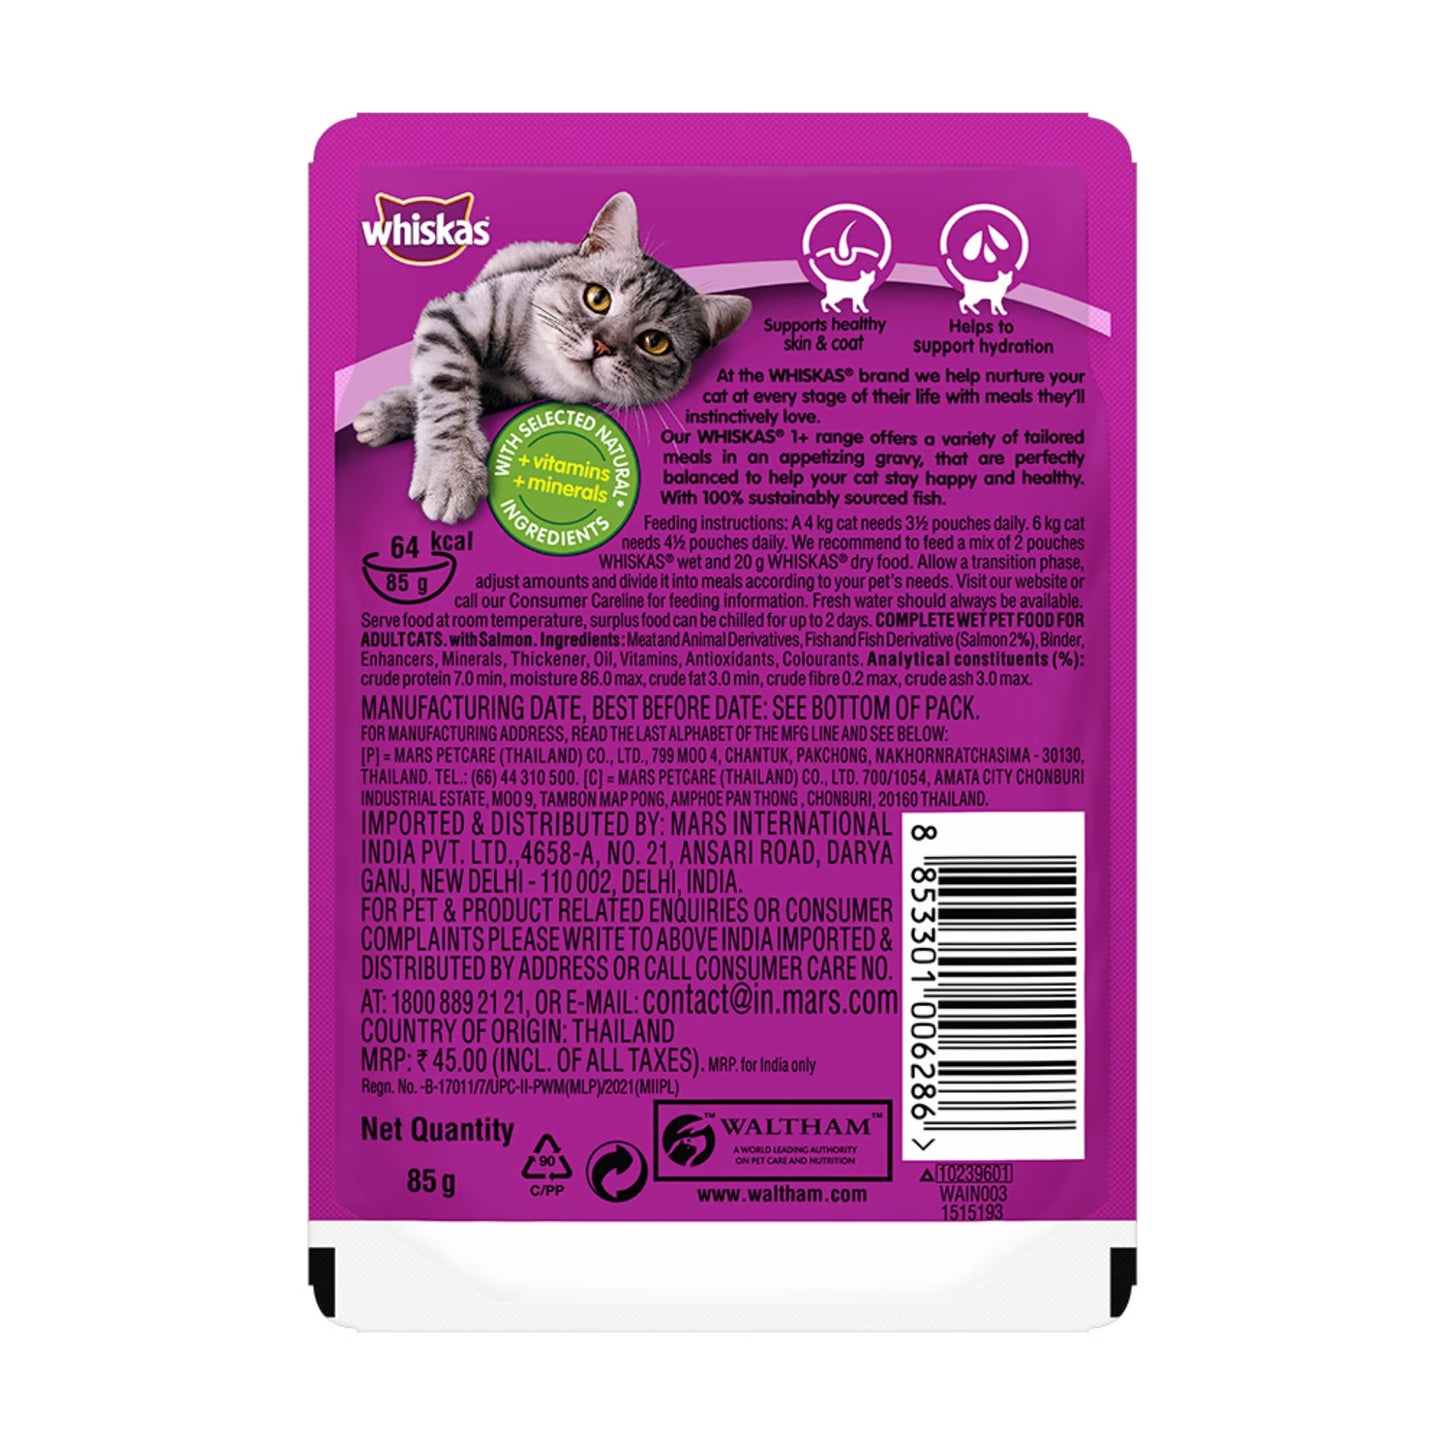 Whiskas Salmon in Gravy Wet Food for Adult Cats - 85gm, Pack of 12